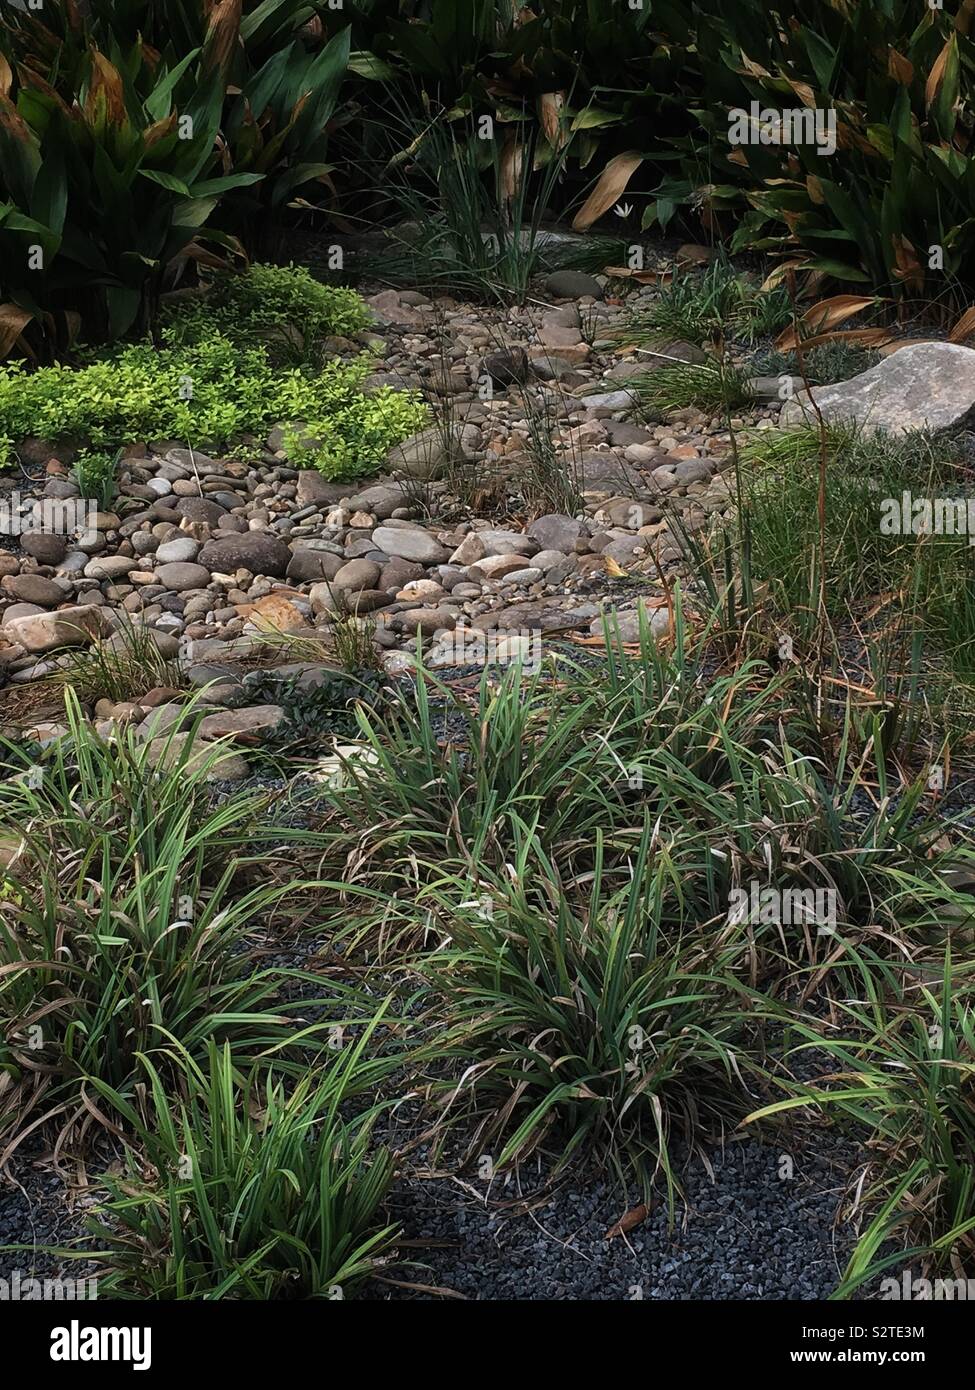 Urban gardening with stones, rocks, and low maintenance plants that require little water. Stock Photo